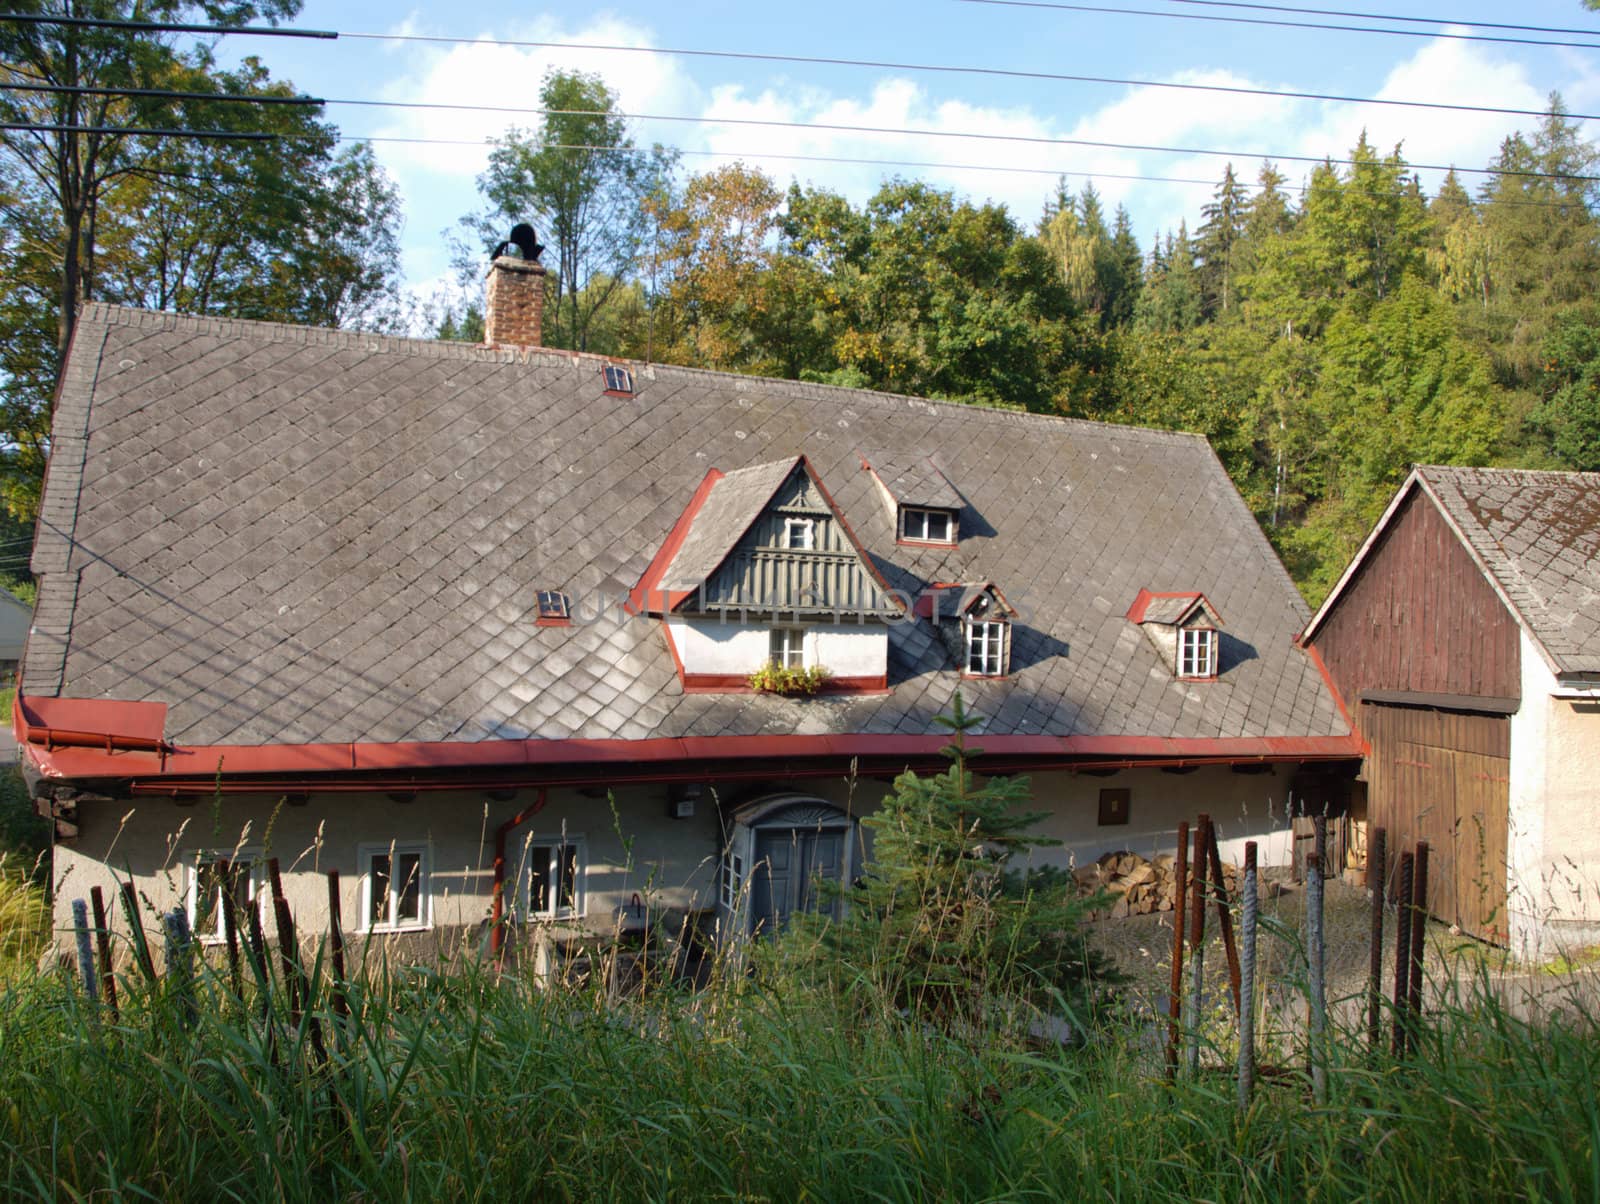 small village building, it has interest roof